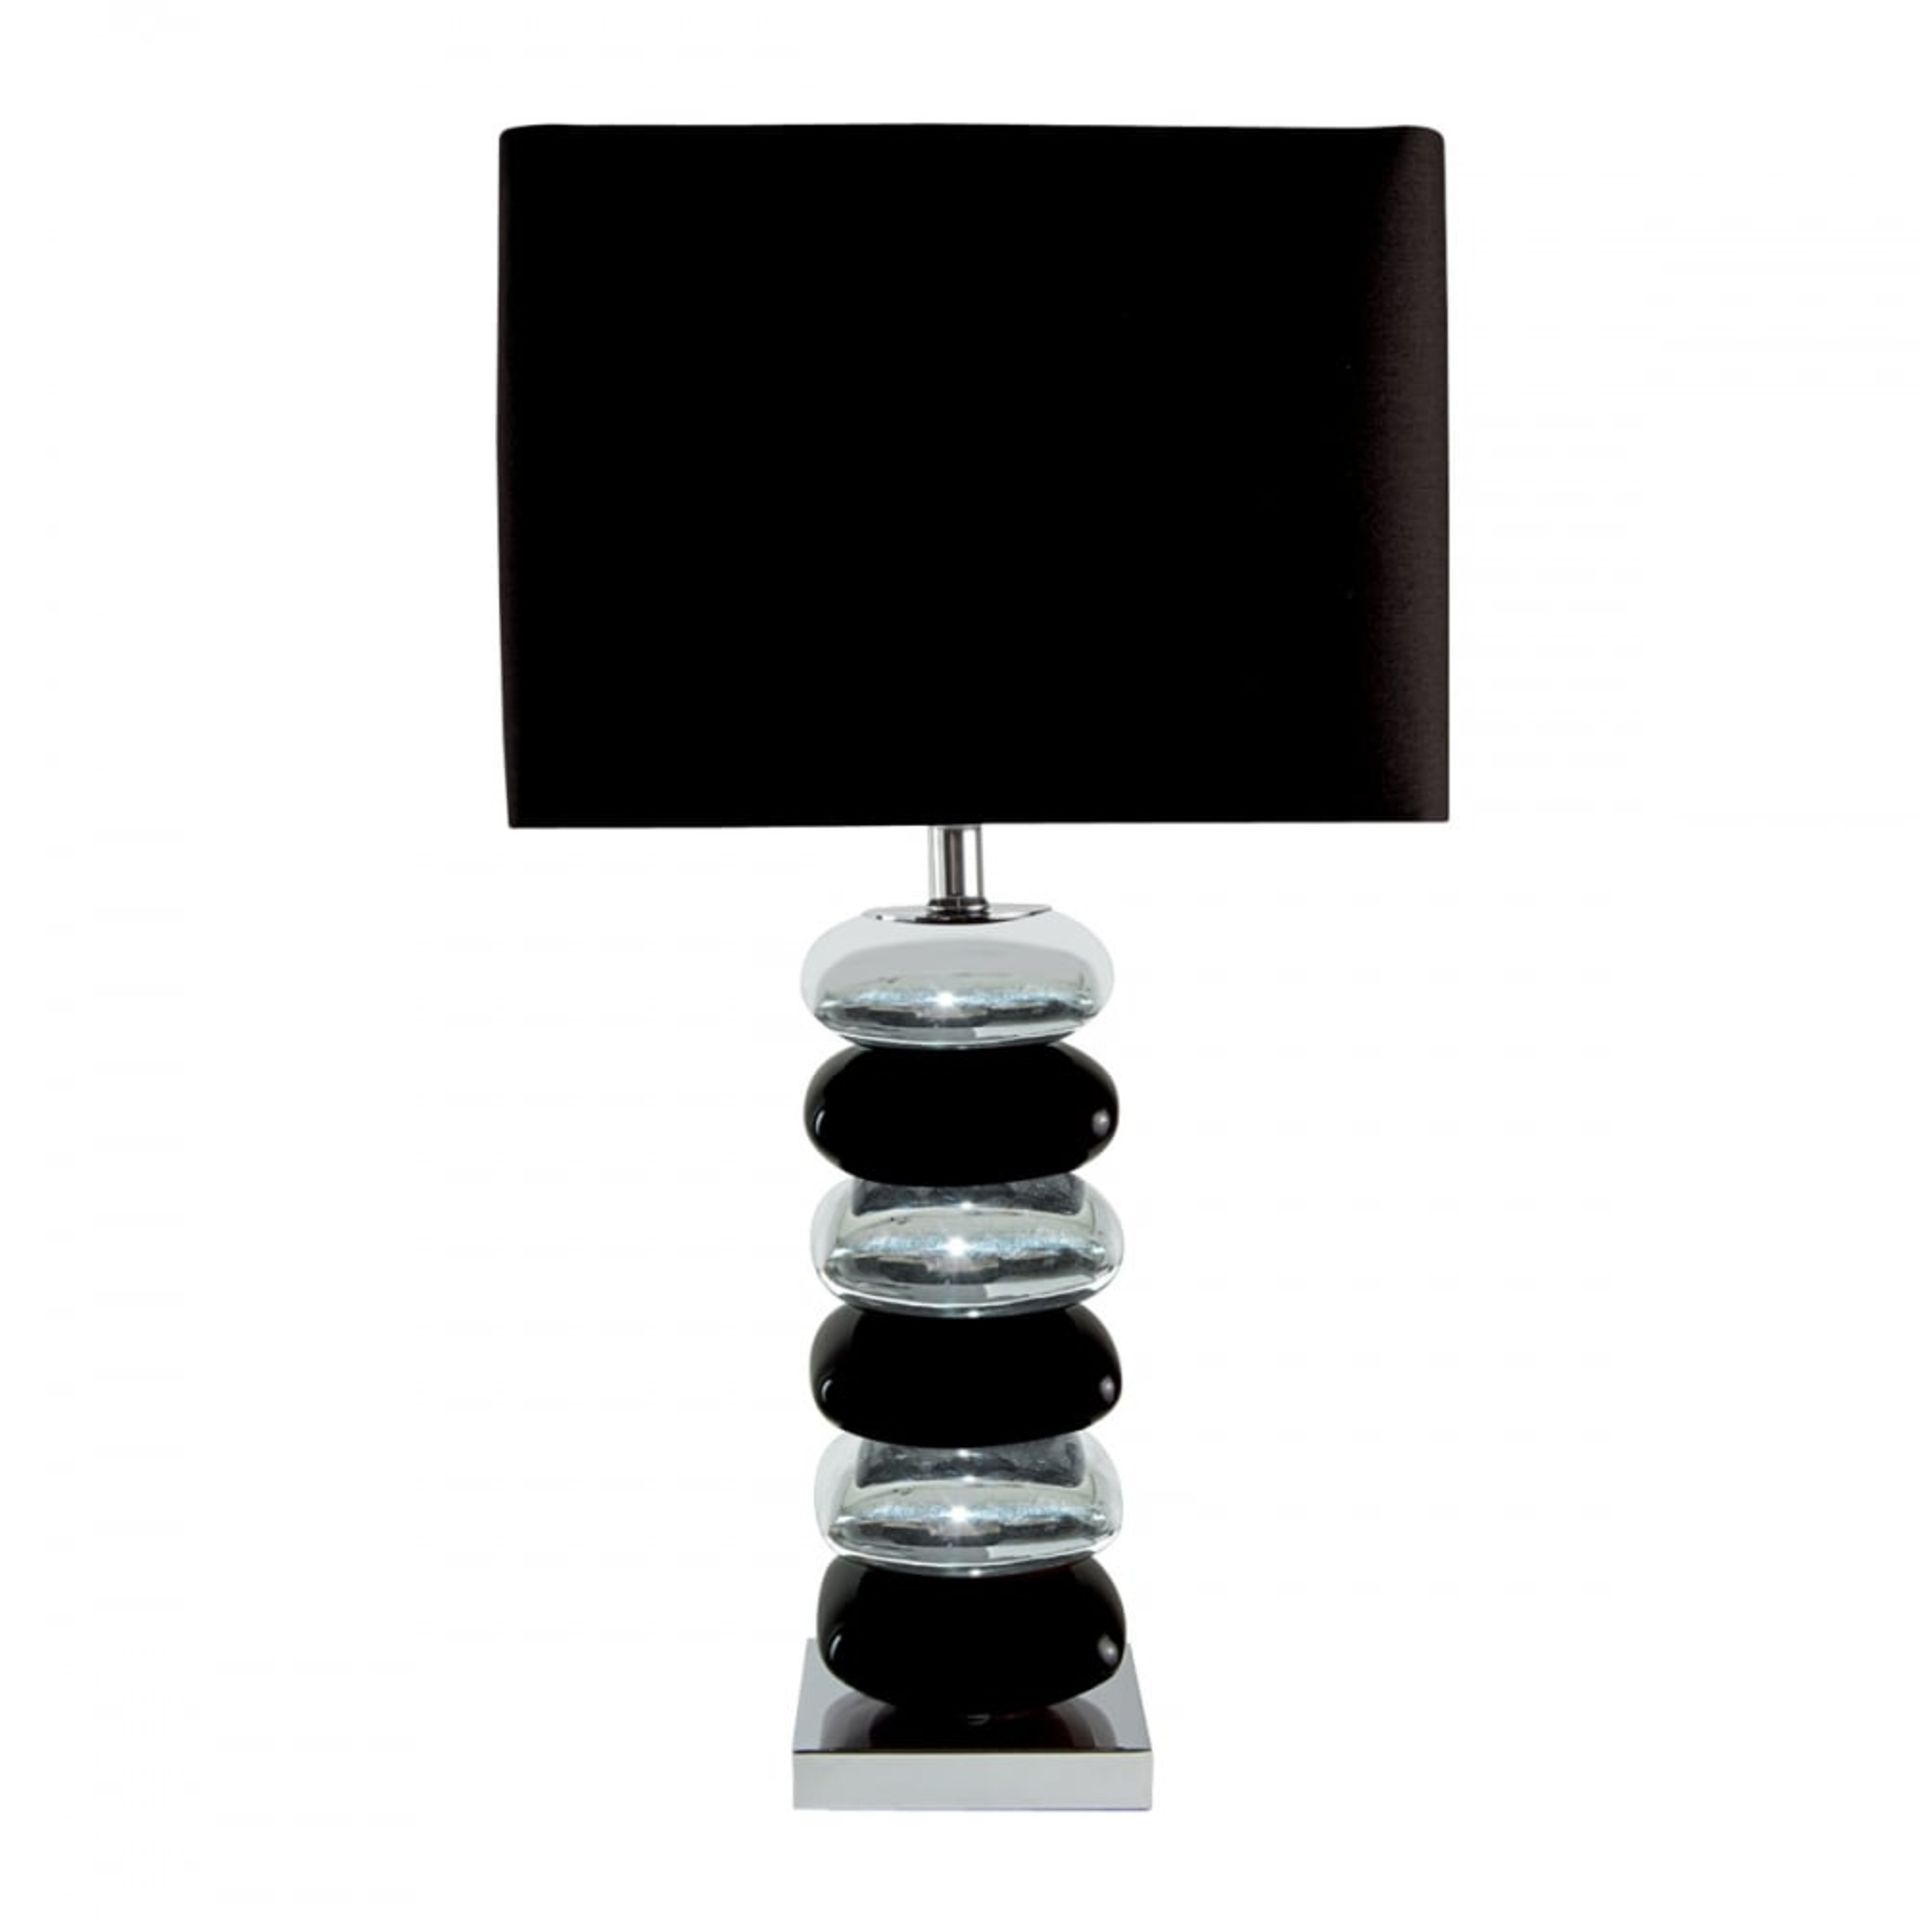 1 x Searchlight Bravo Table Lamp - Pillow Stacked Black/Chrome Base and Black Shade - Product